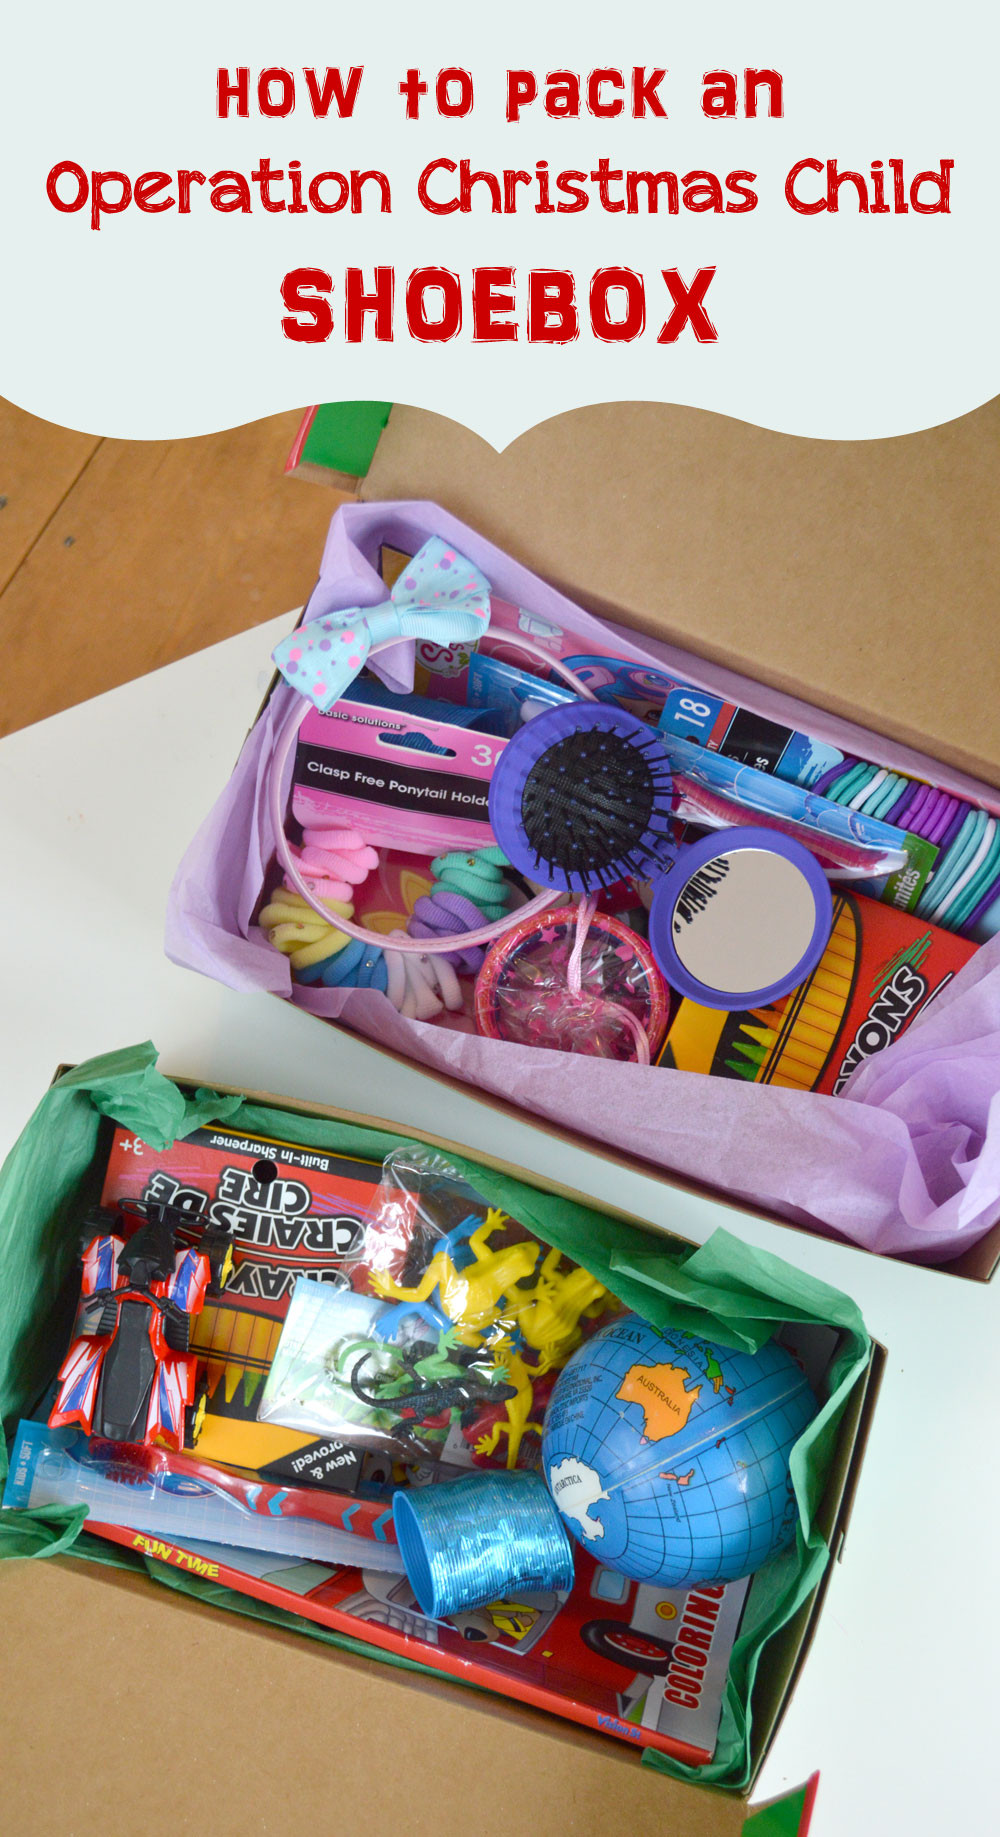 Operation Christmas Child Gift Ideas
 How to Pack an Operation Christmas Child Shoebox Create